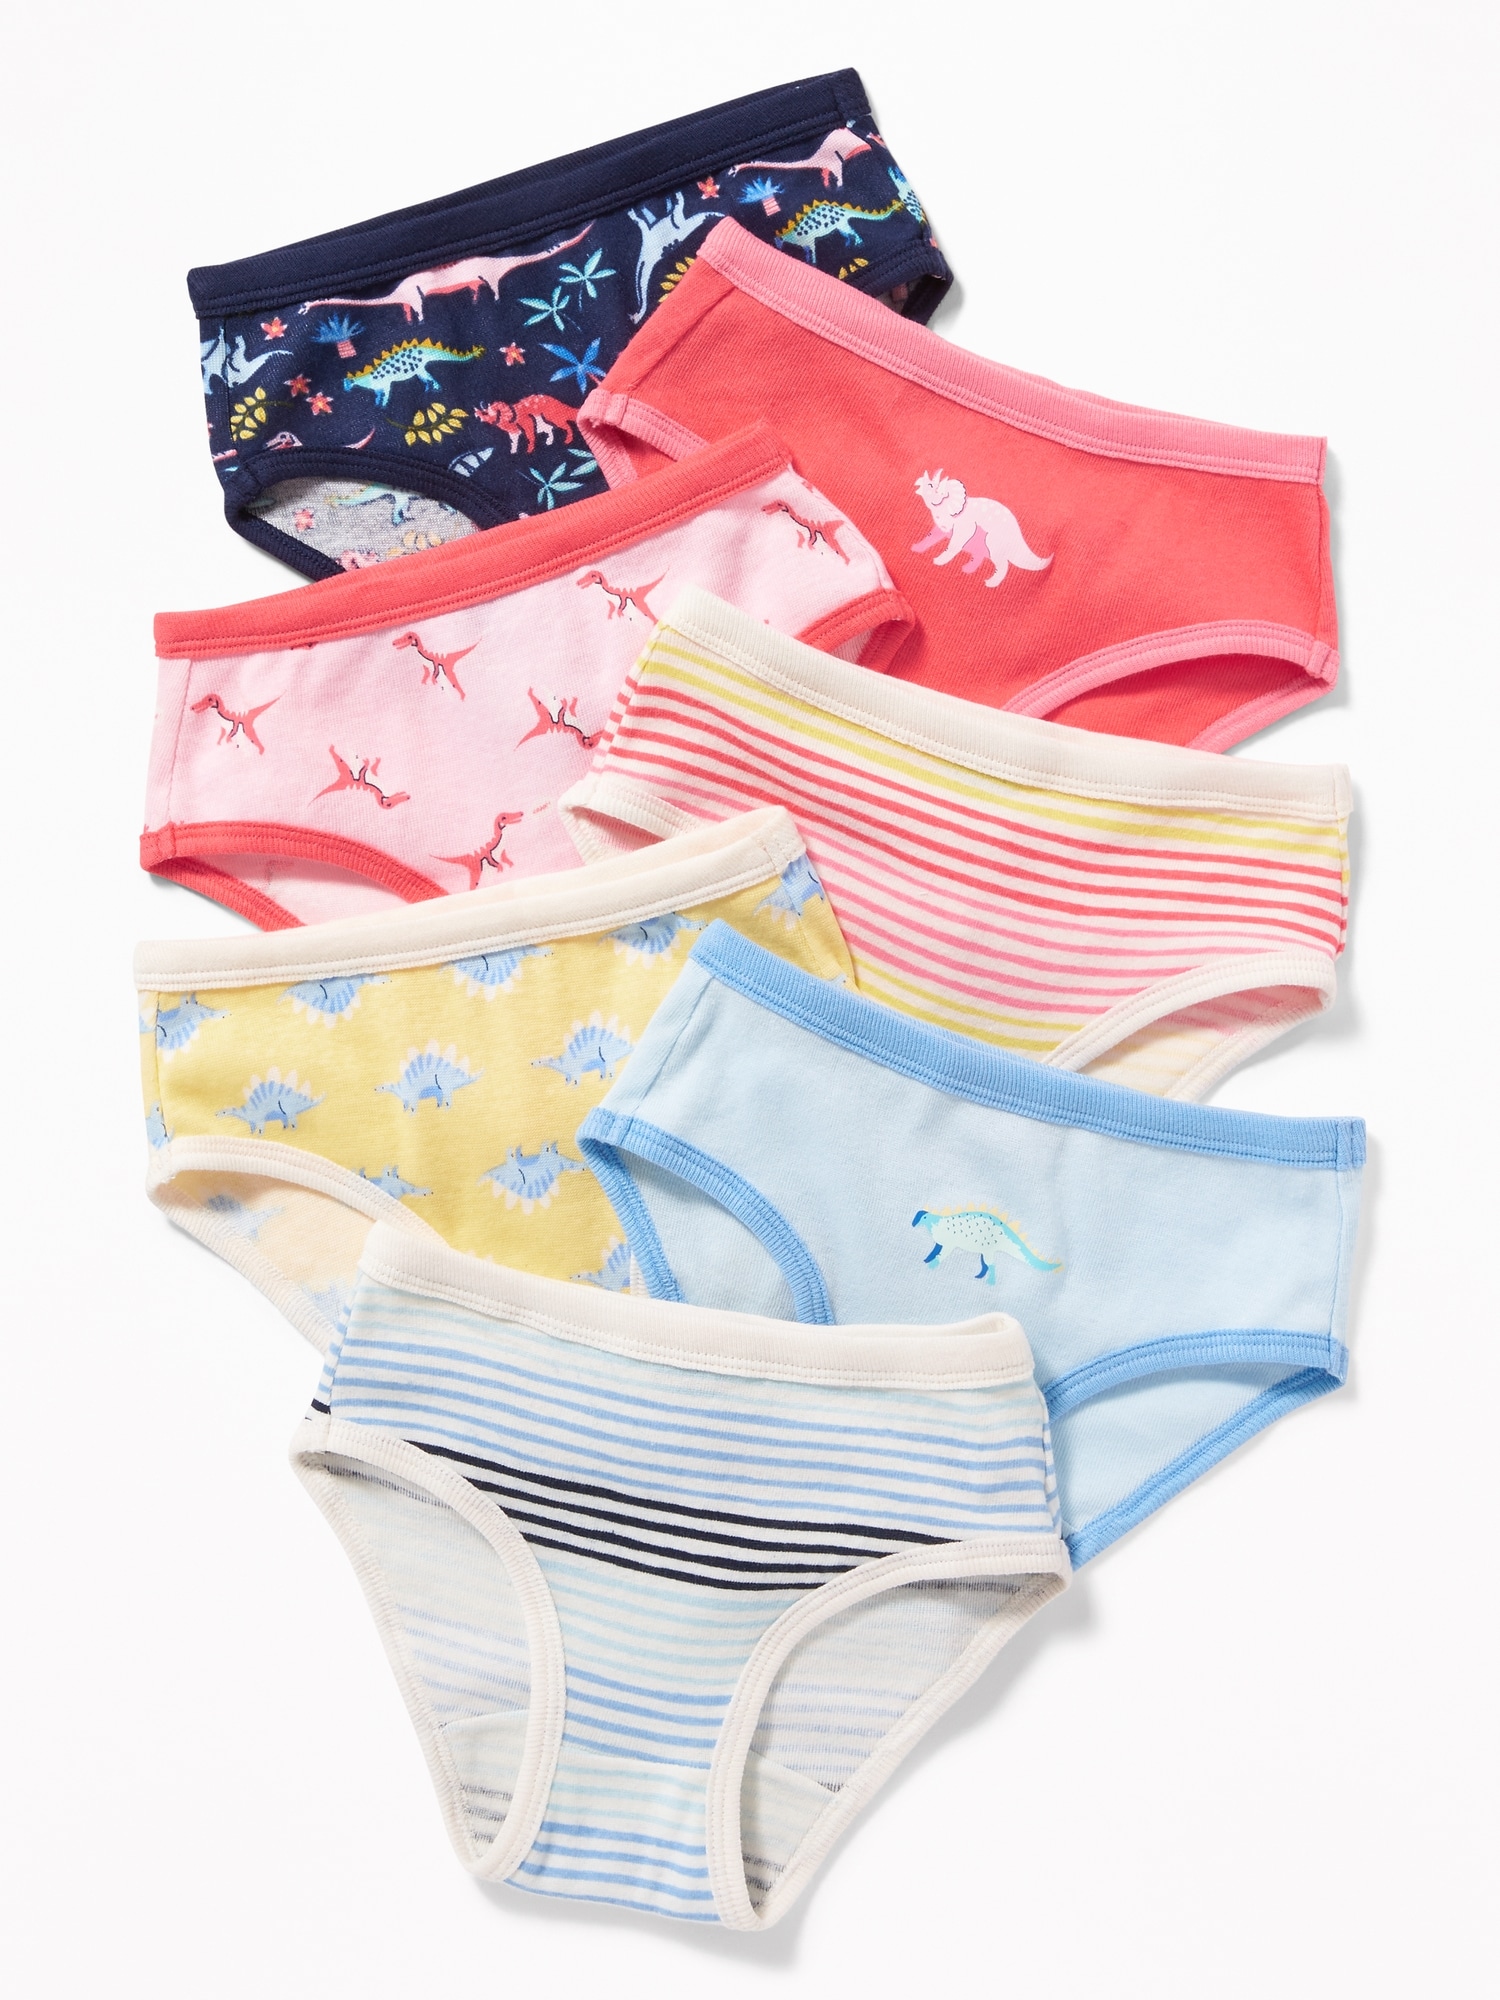 Briefs, 7.colorful Printed Panties For Girls/4-5yr